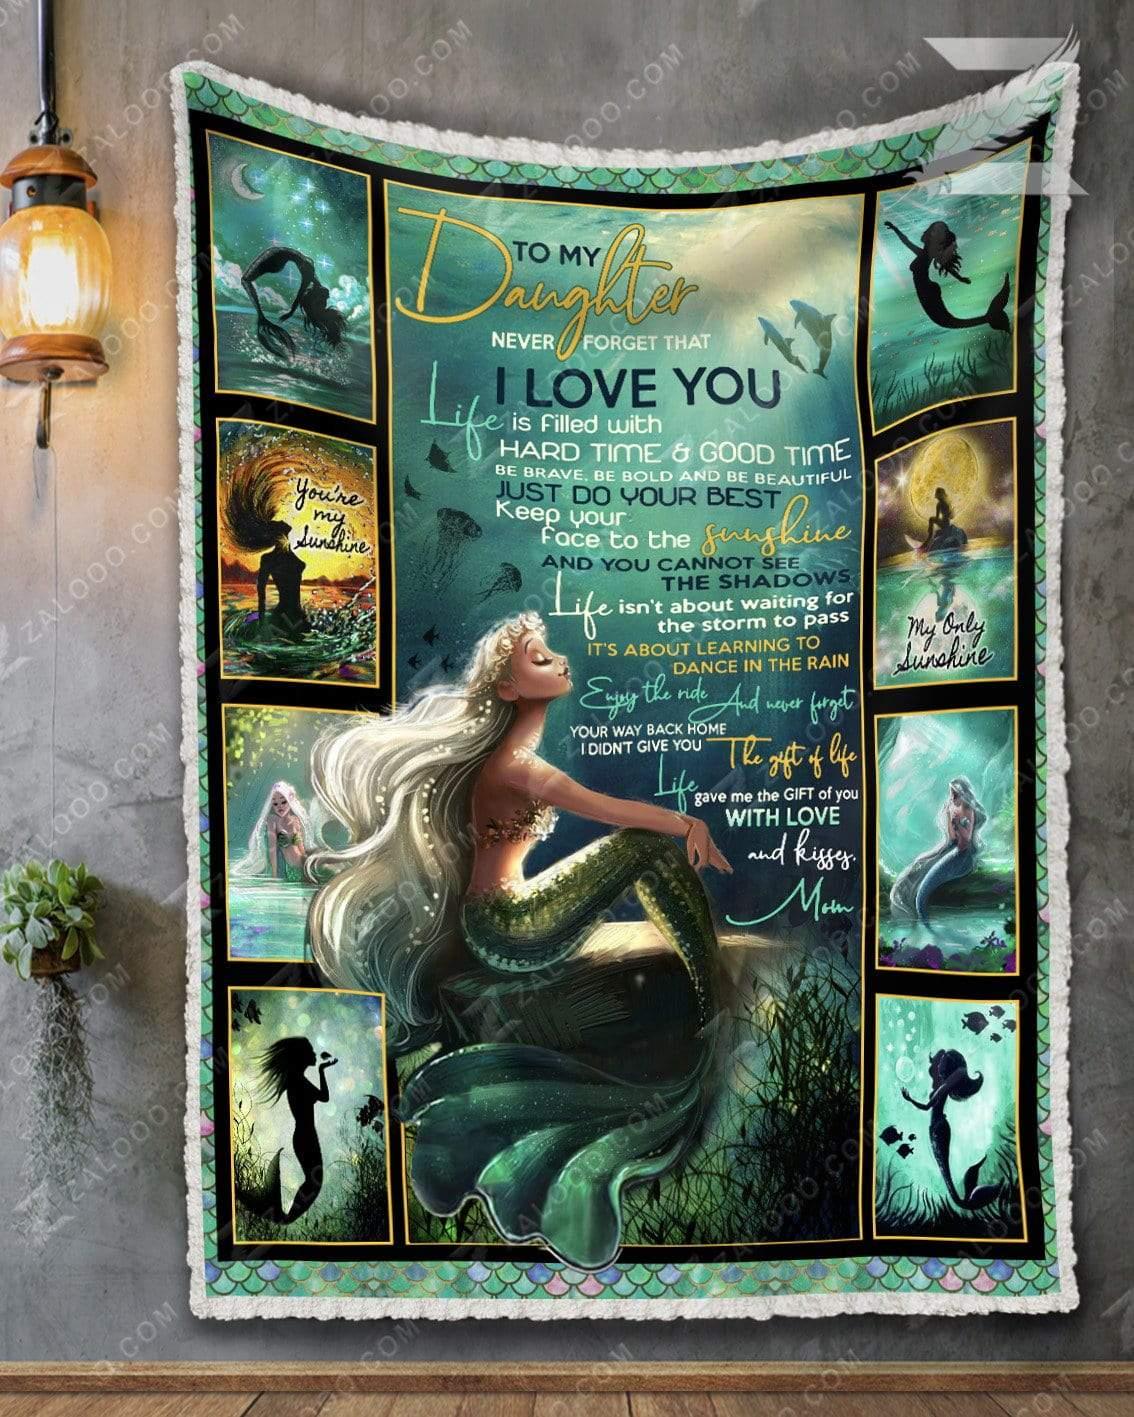 To my daughter never forget that I love you you are my sunshine mermaid blanket - original